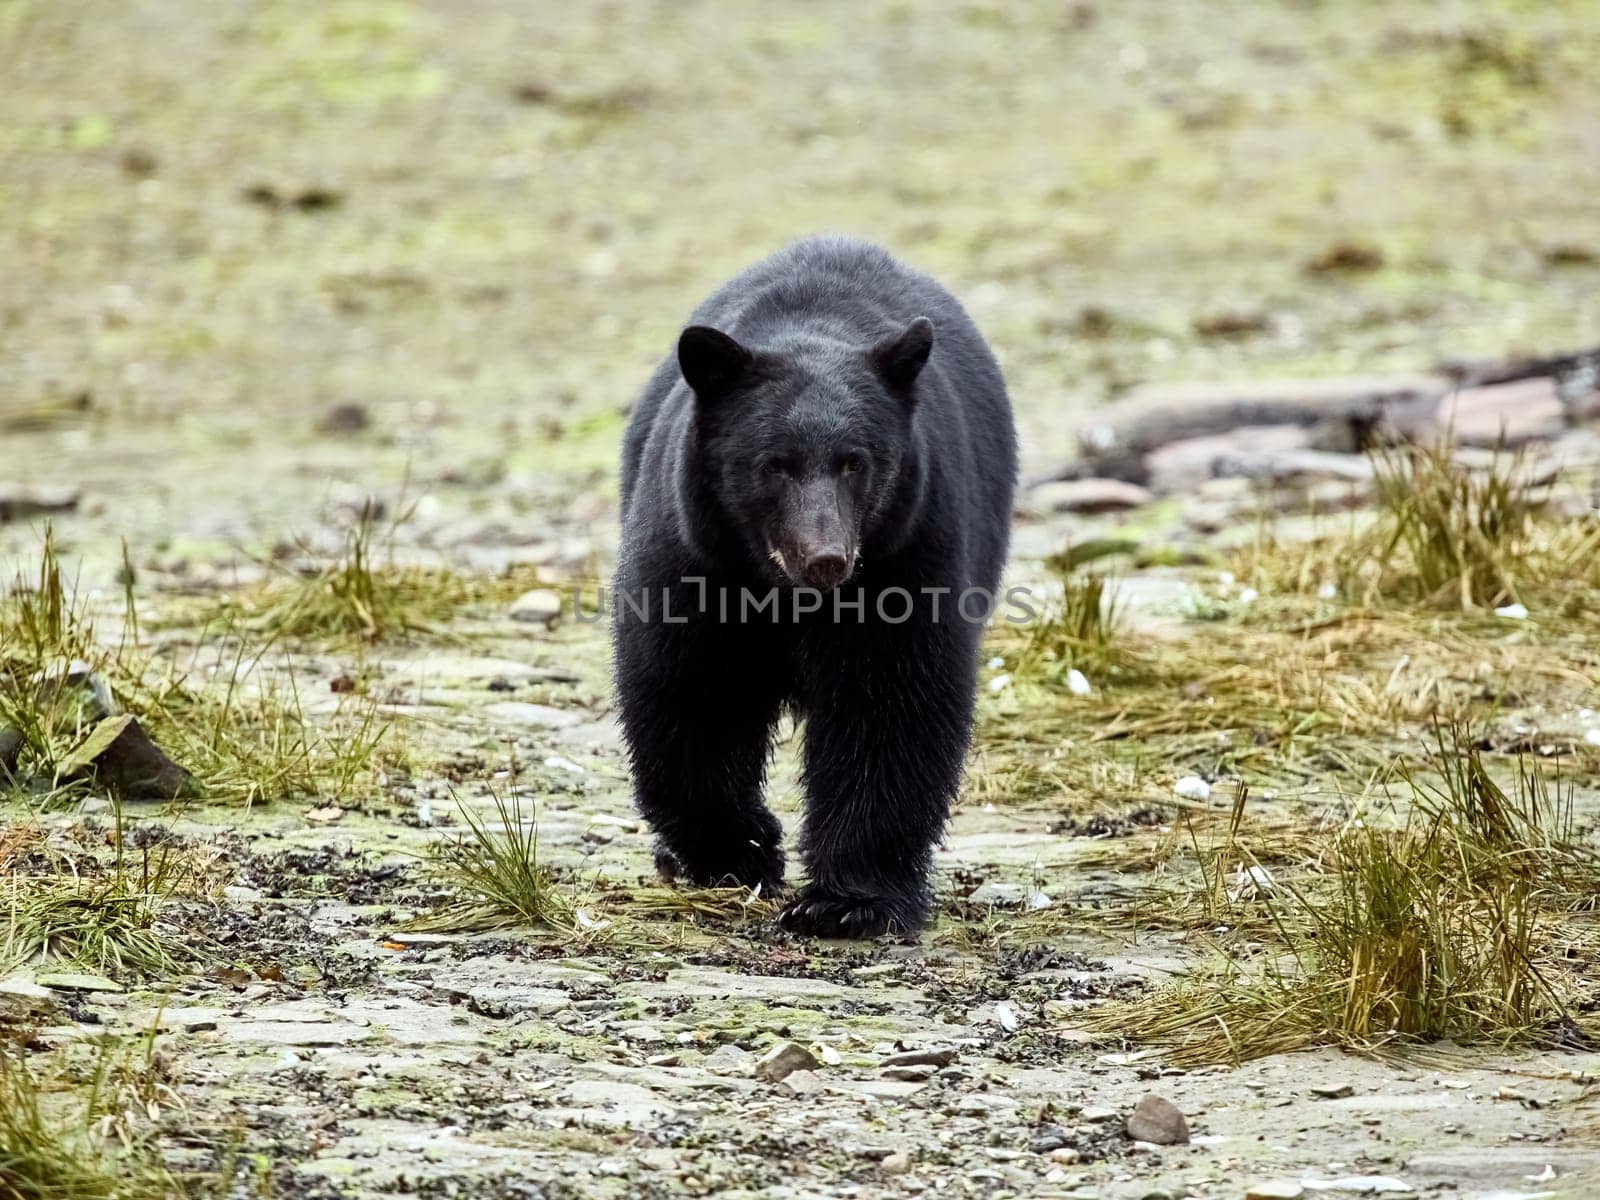 Black Bear walking towards you on way to a river to look for Salmon.